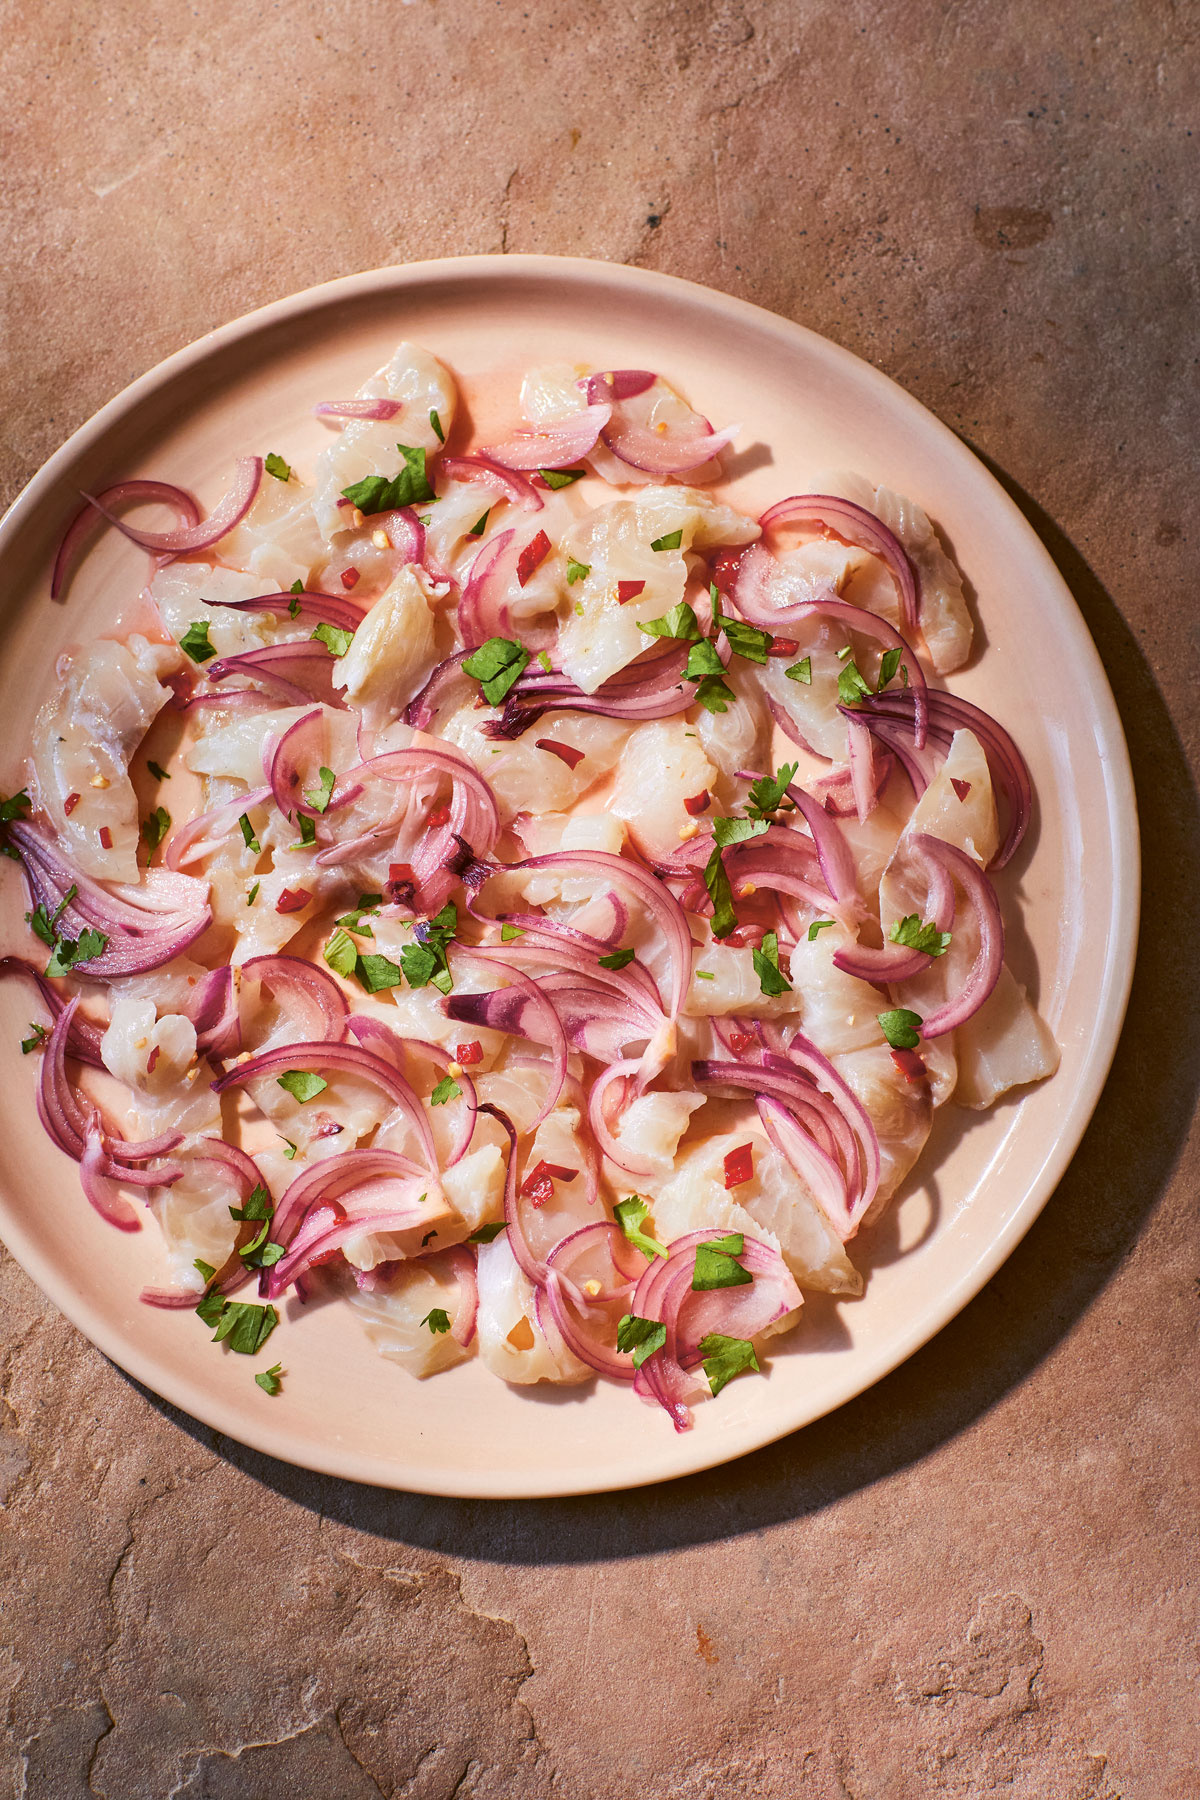 Image of Shu Han Lee's Lime-Cured Fish with Chilli Padi and Pink Onions